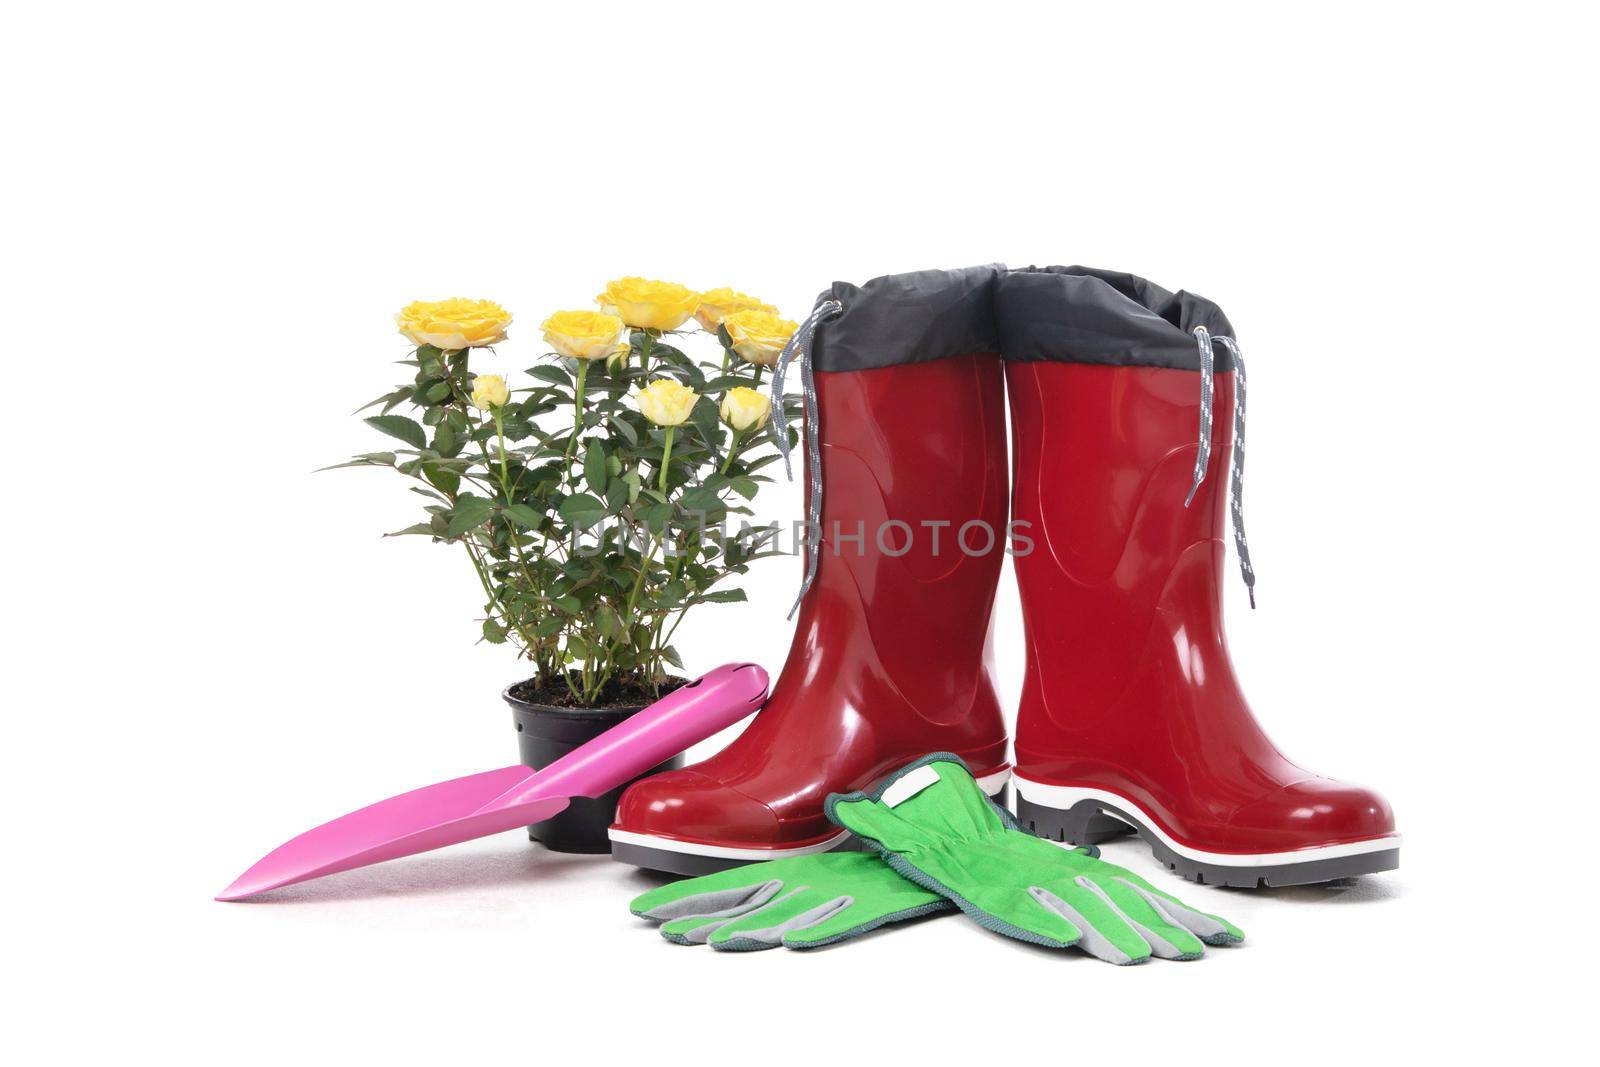 Garden tools with flower pot and boots isolated on white background